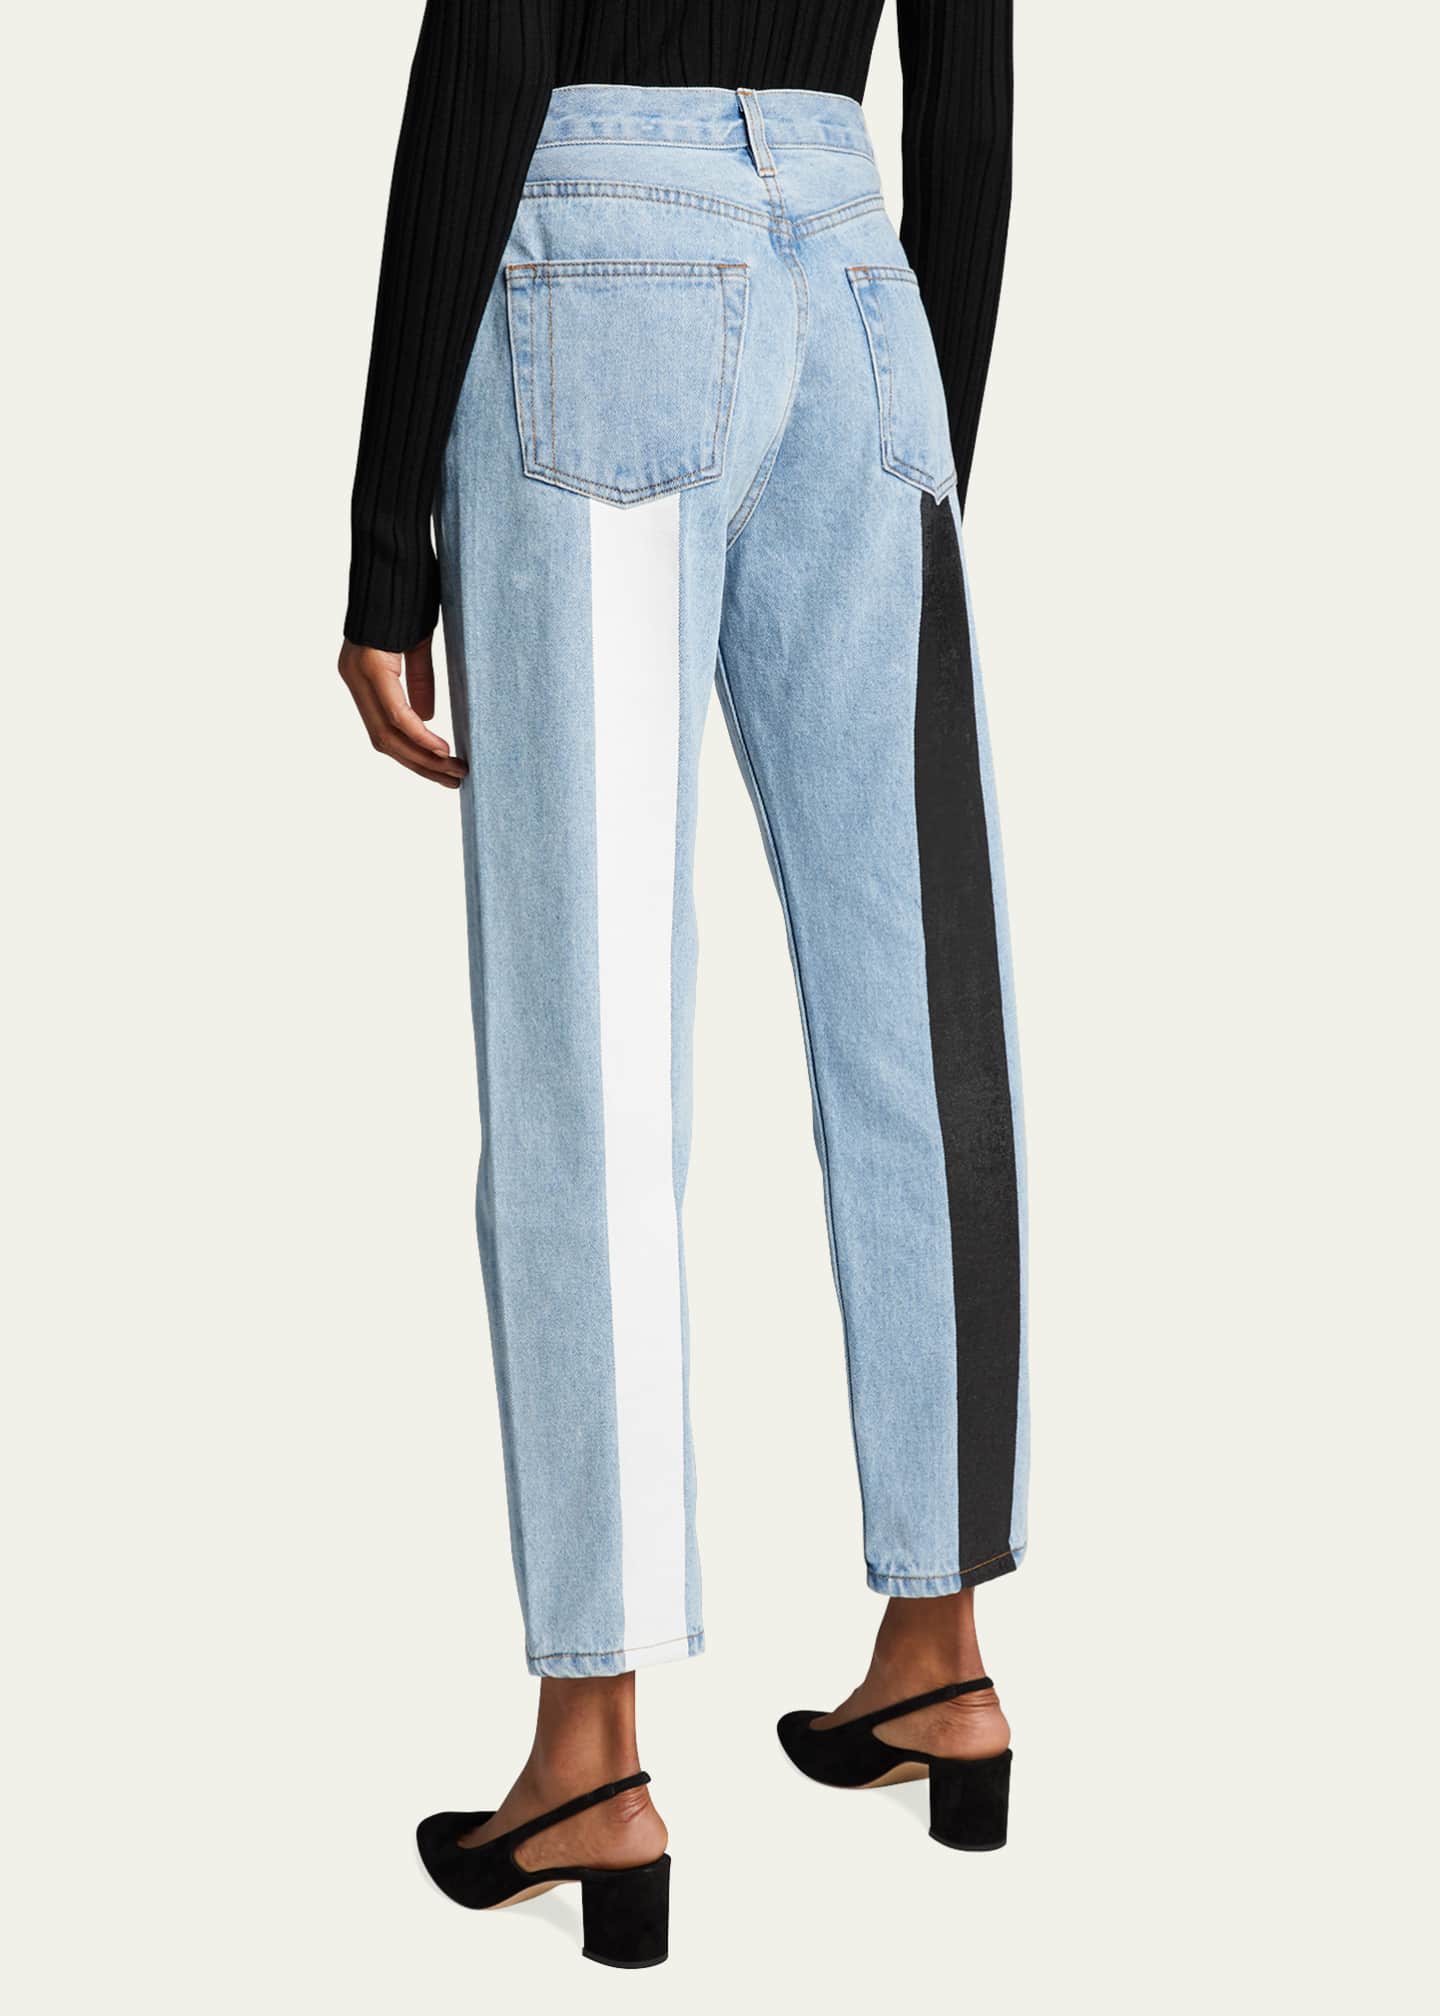 Still Here Tate Cropped Jeans with Contrast Panels - Bergdorf Goodman